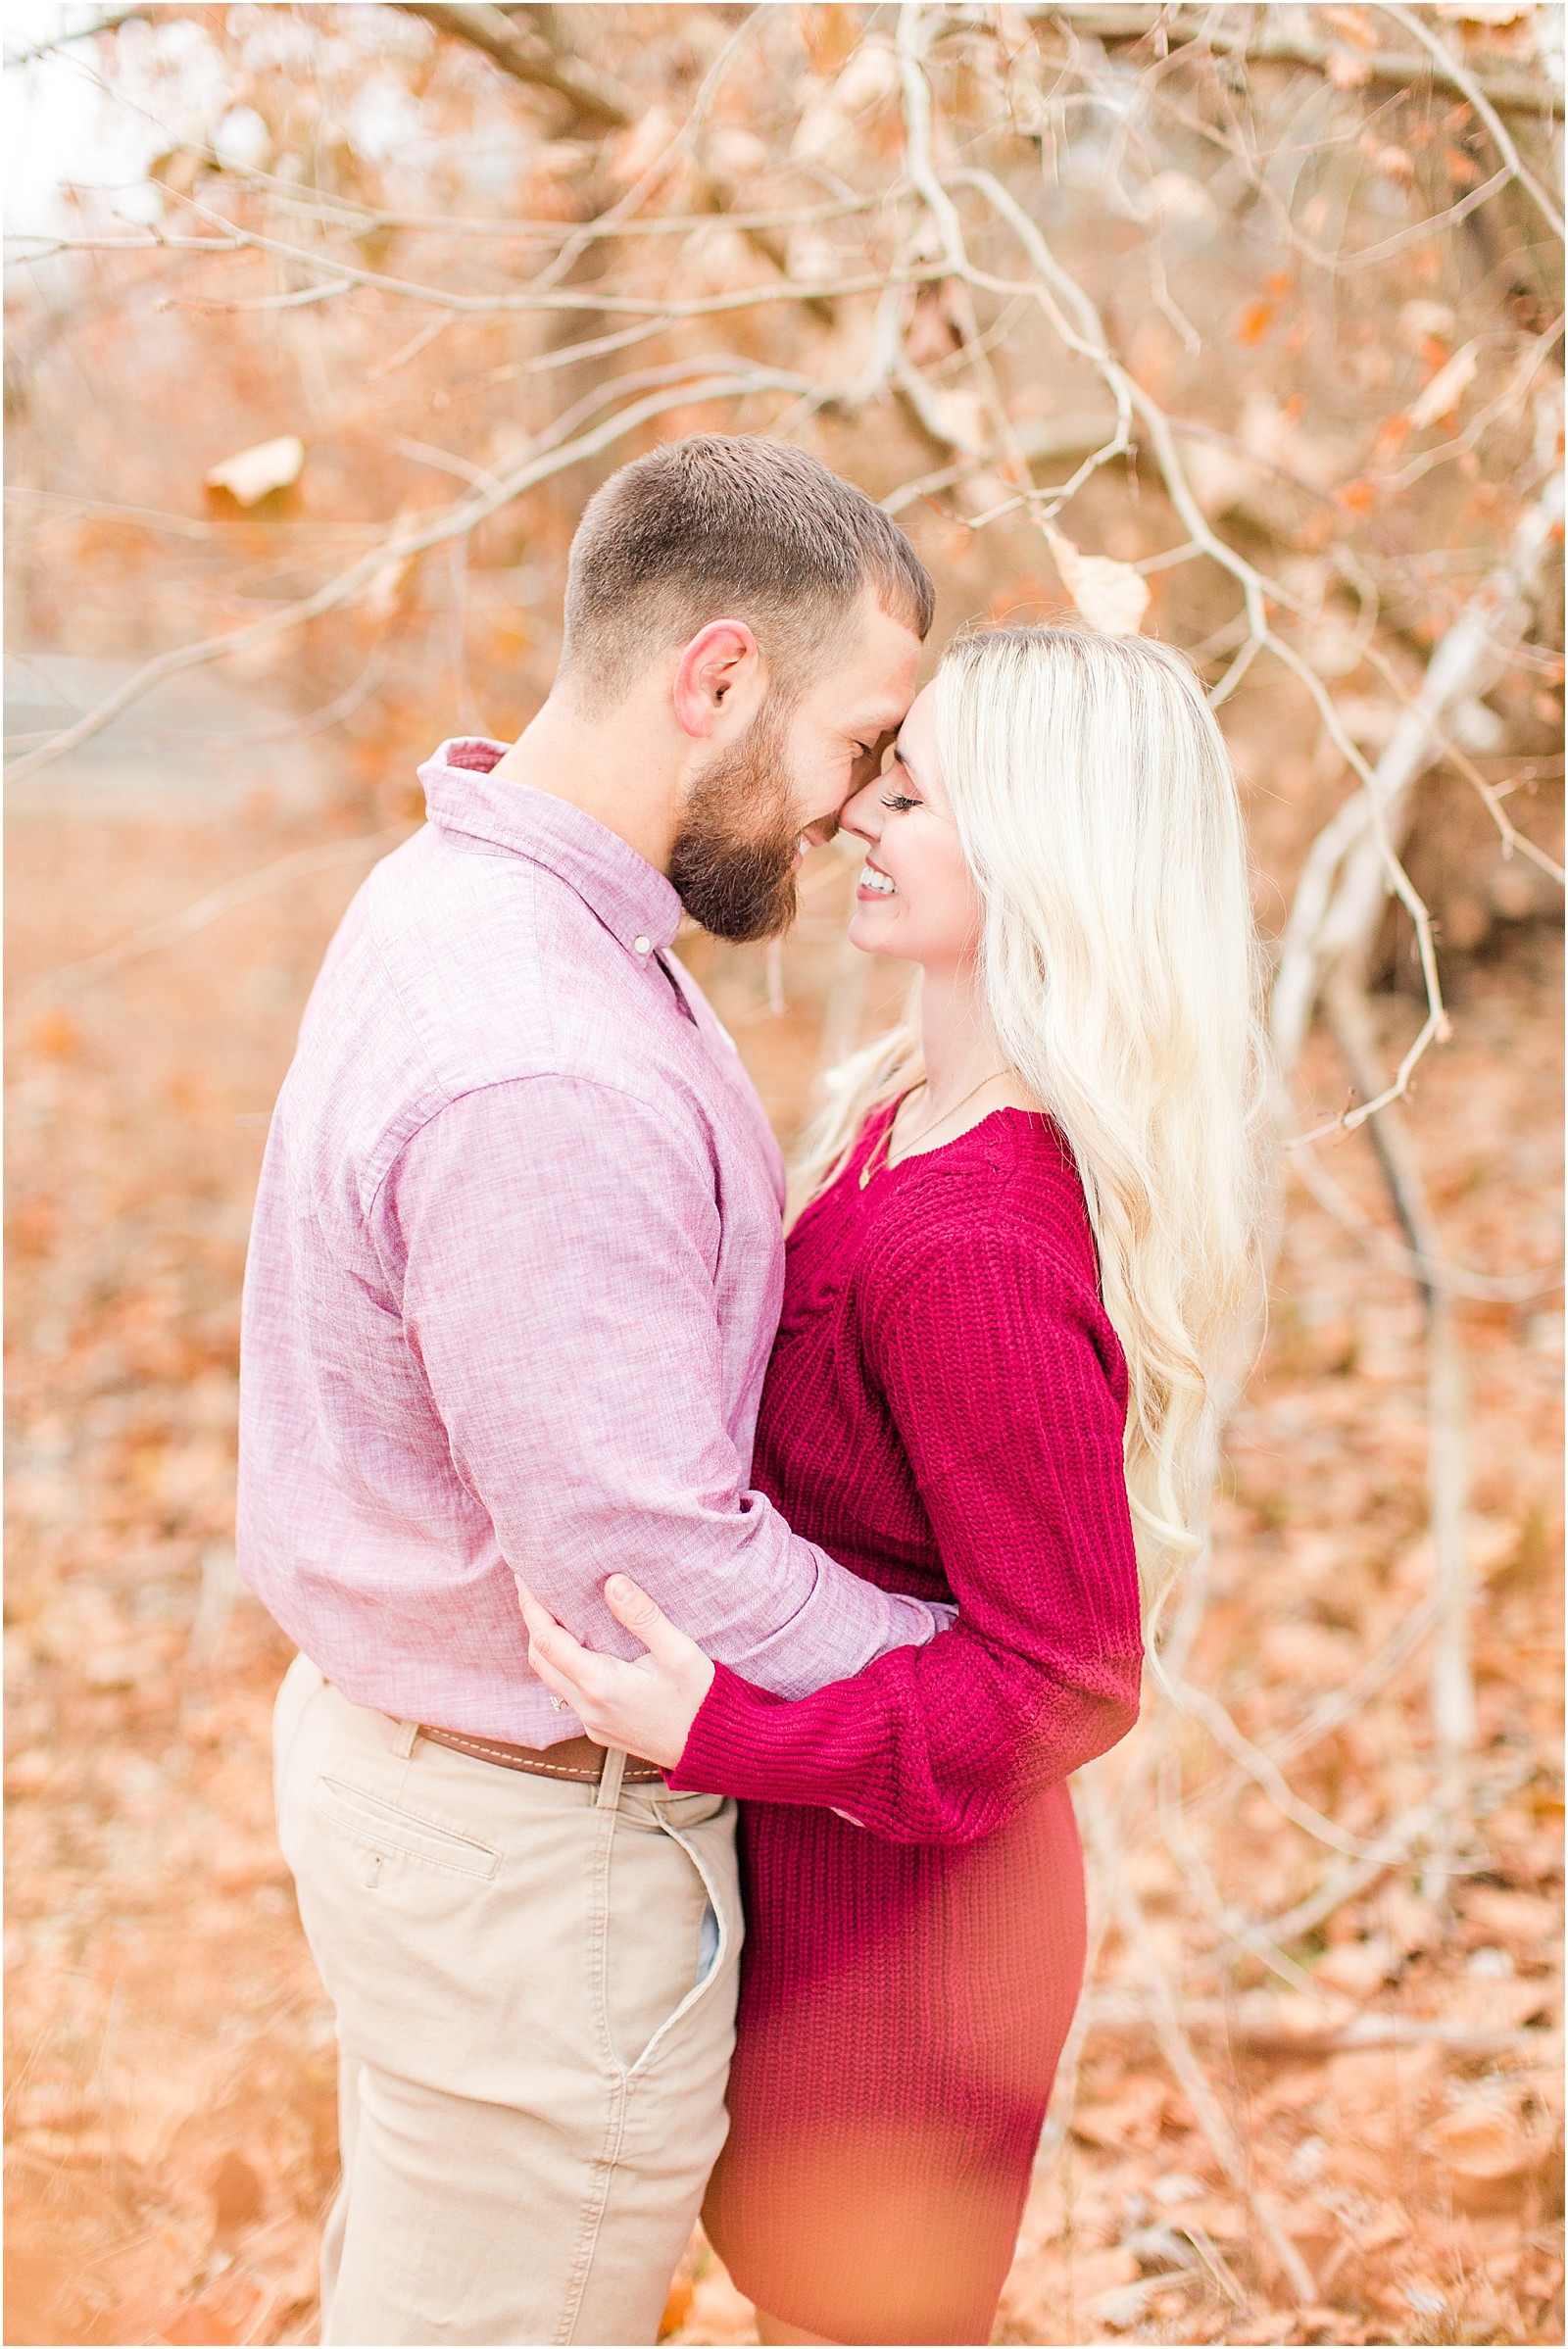 An sweet and snuggly fall anniversary session in Loogootee, Indiana. | #anniversarysession #fallsession #southernindianawedding | 014.jpg